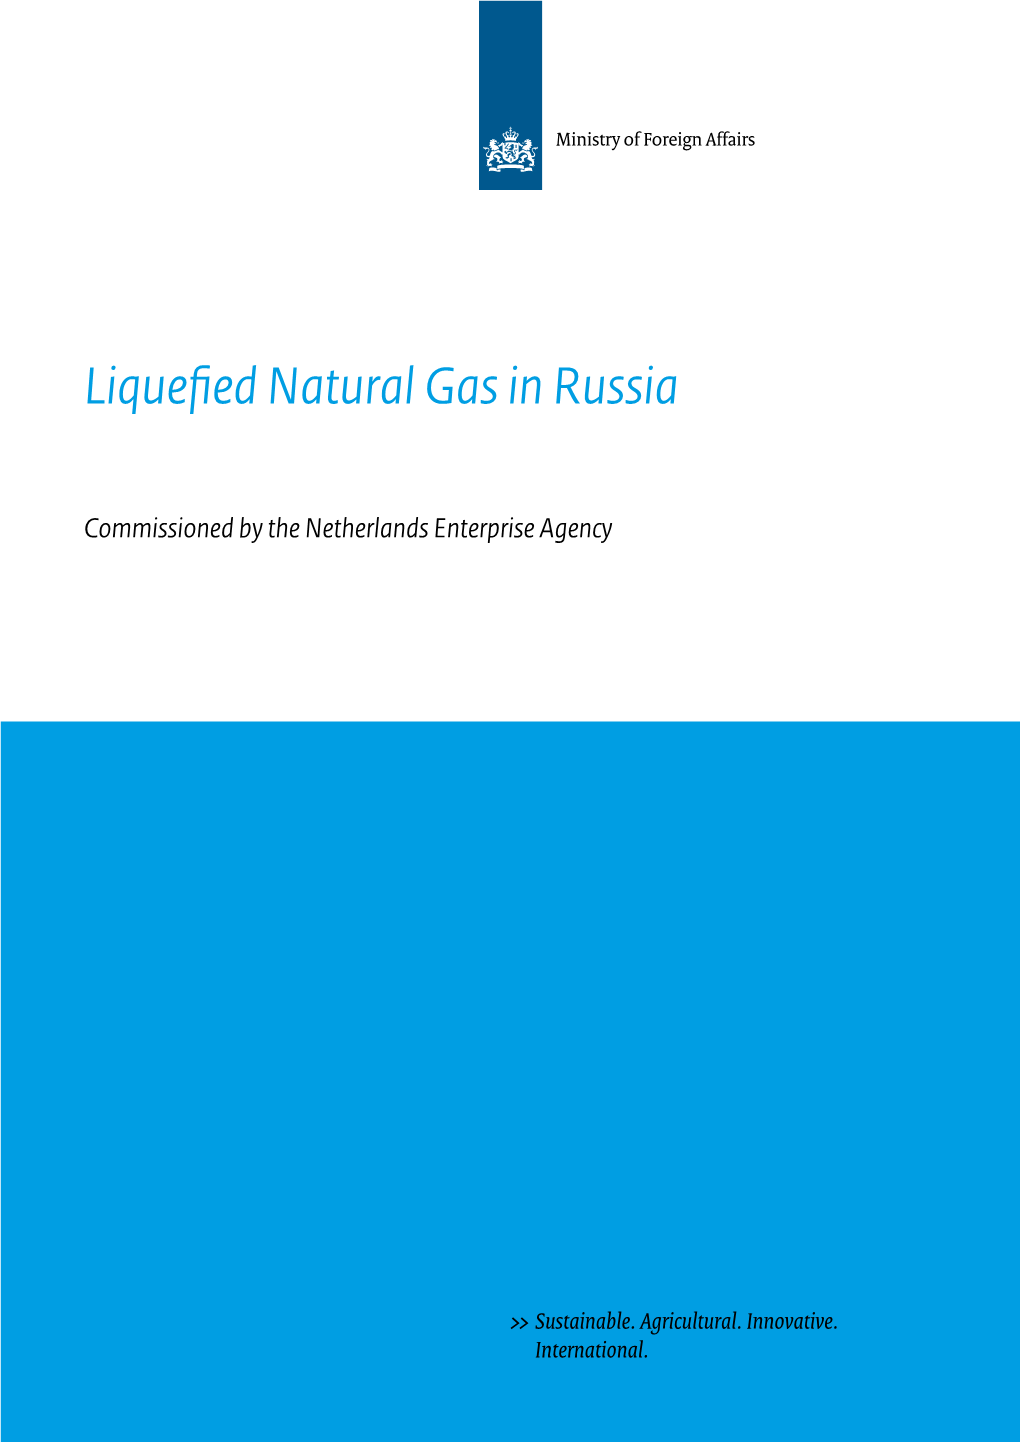 Liquefied Natural Gas in Russia Photo by Dylan Mcleod